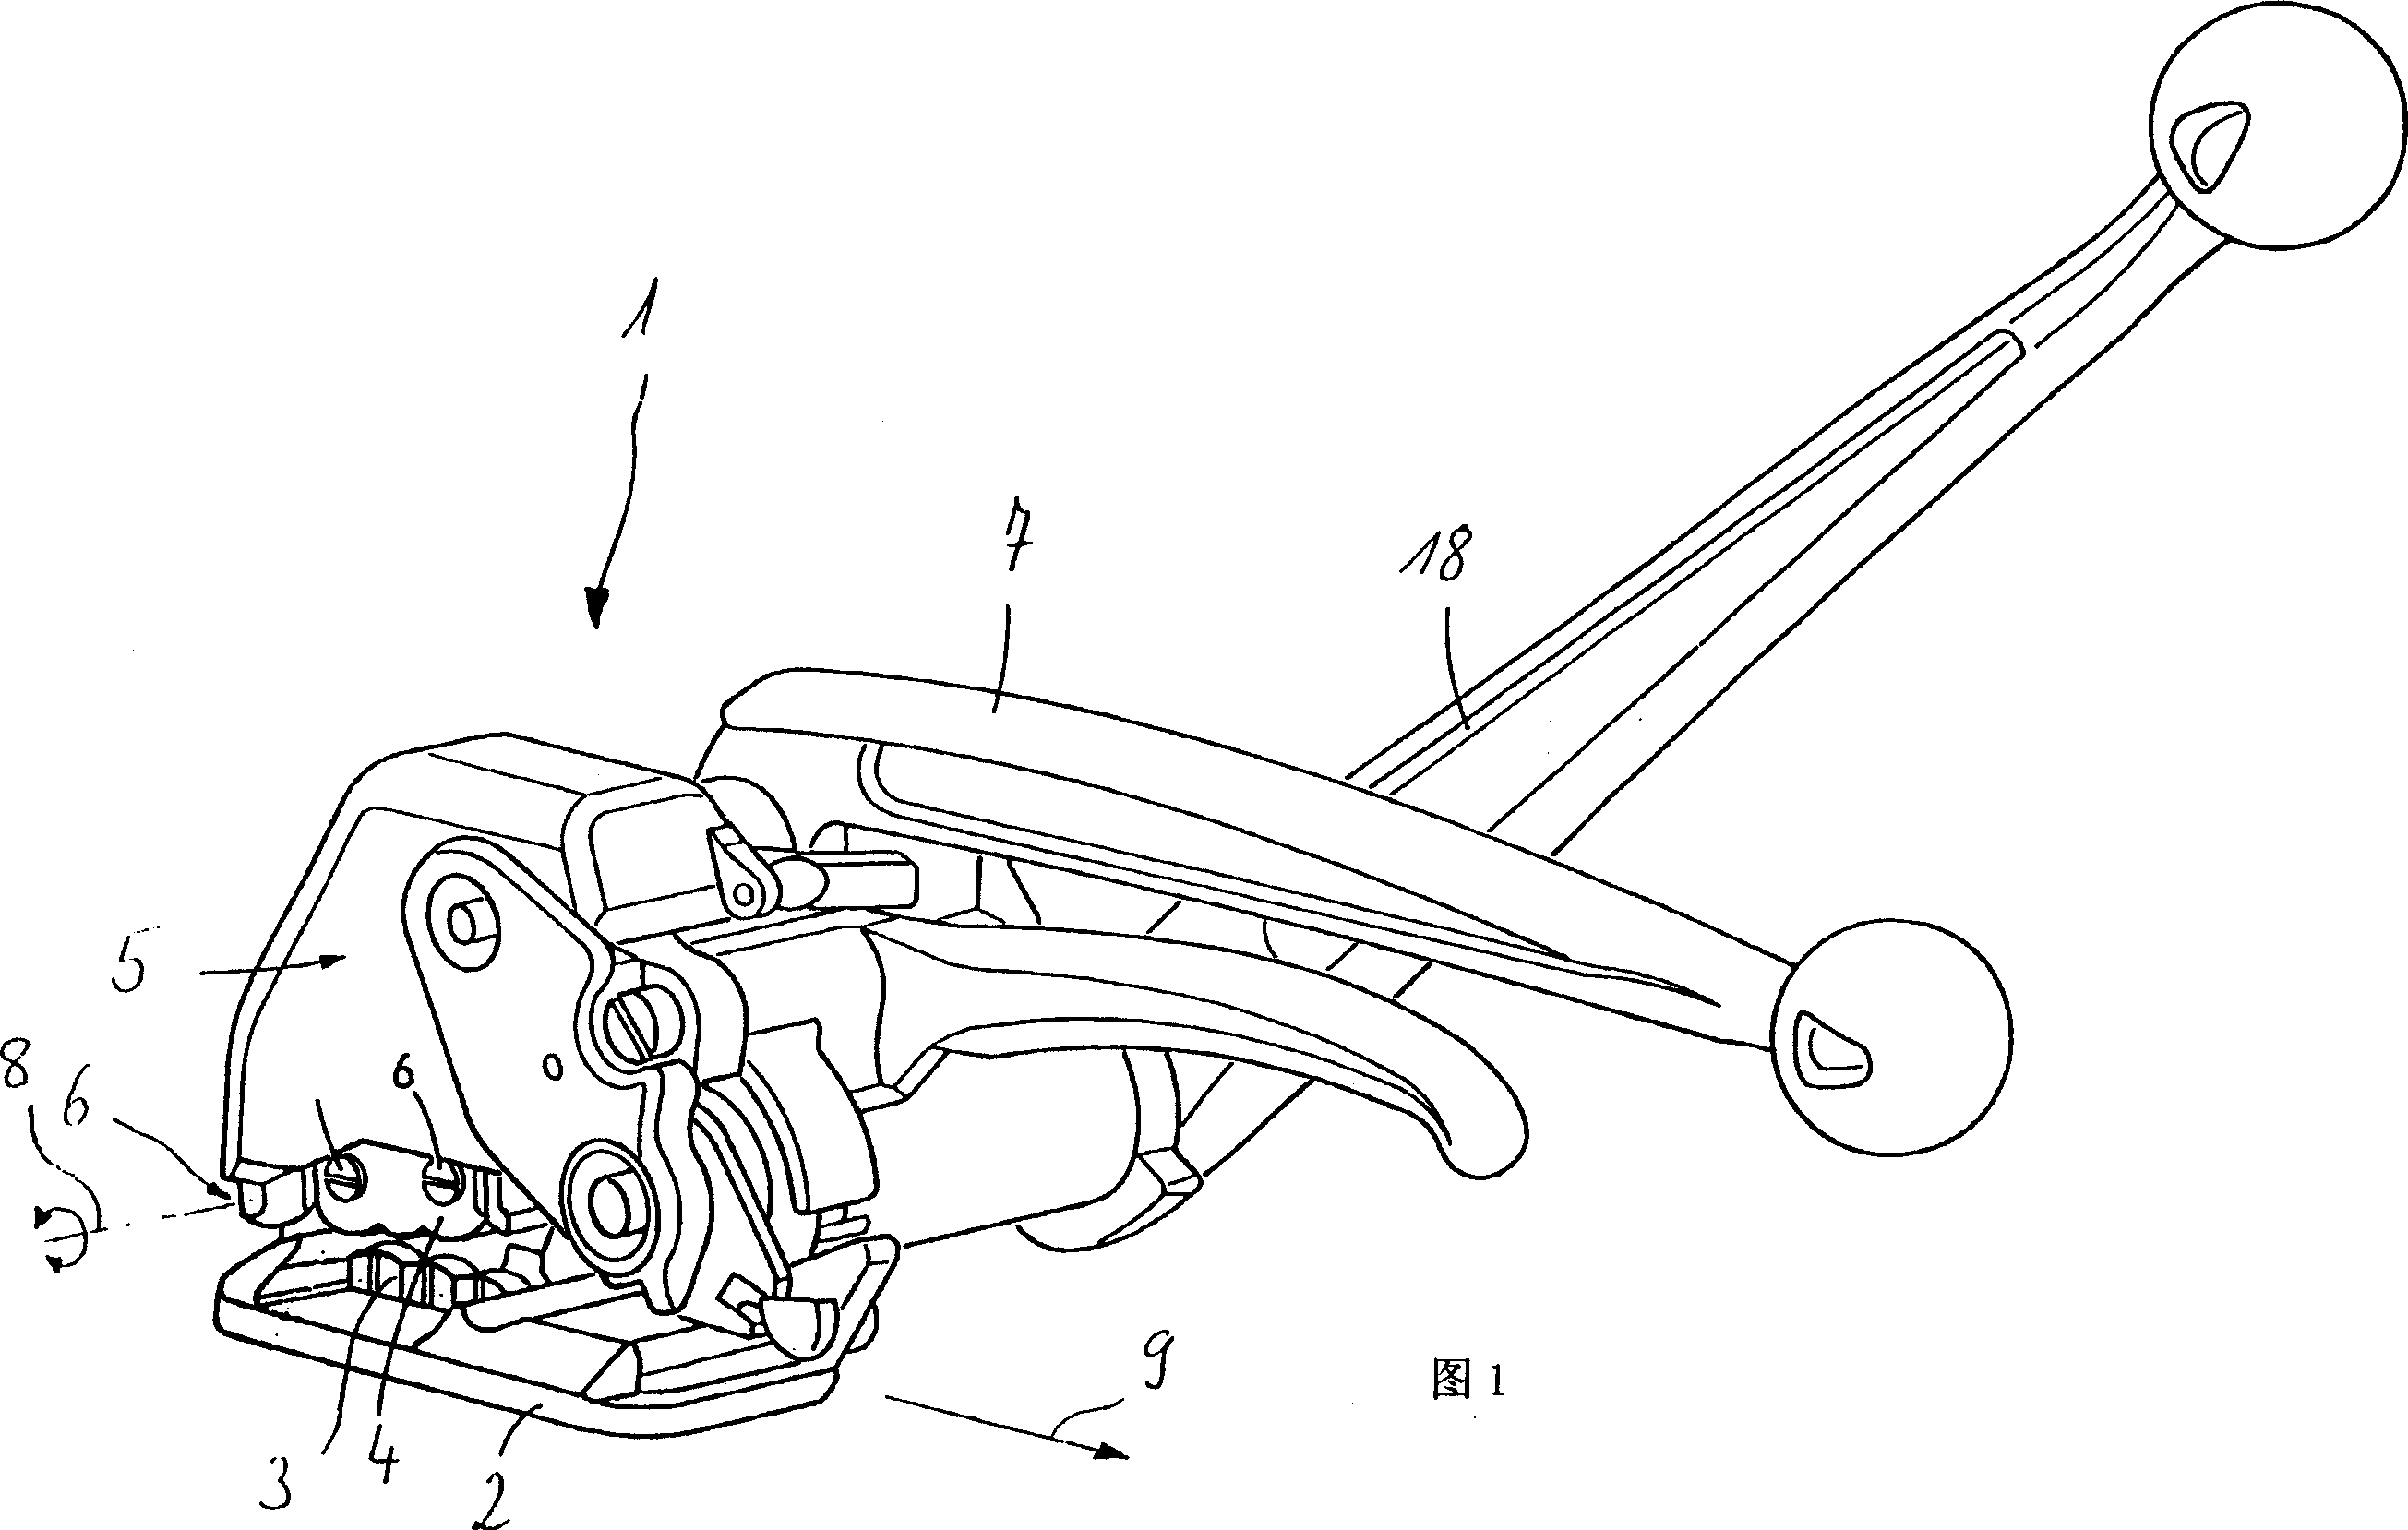 Punching/deforming tool for hundle-up device